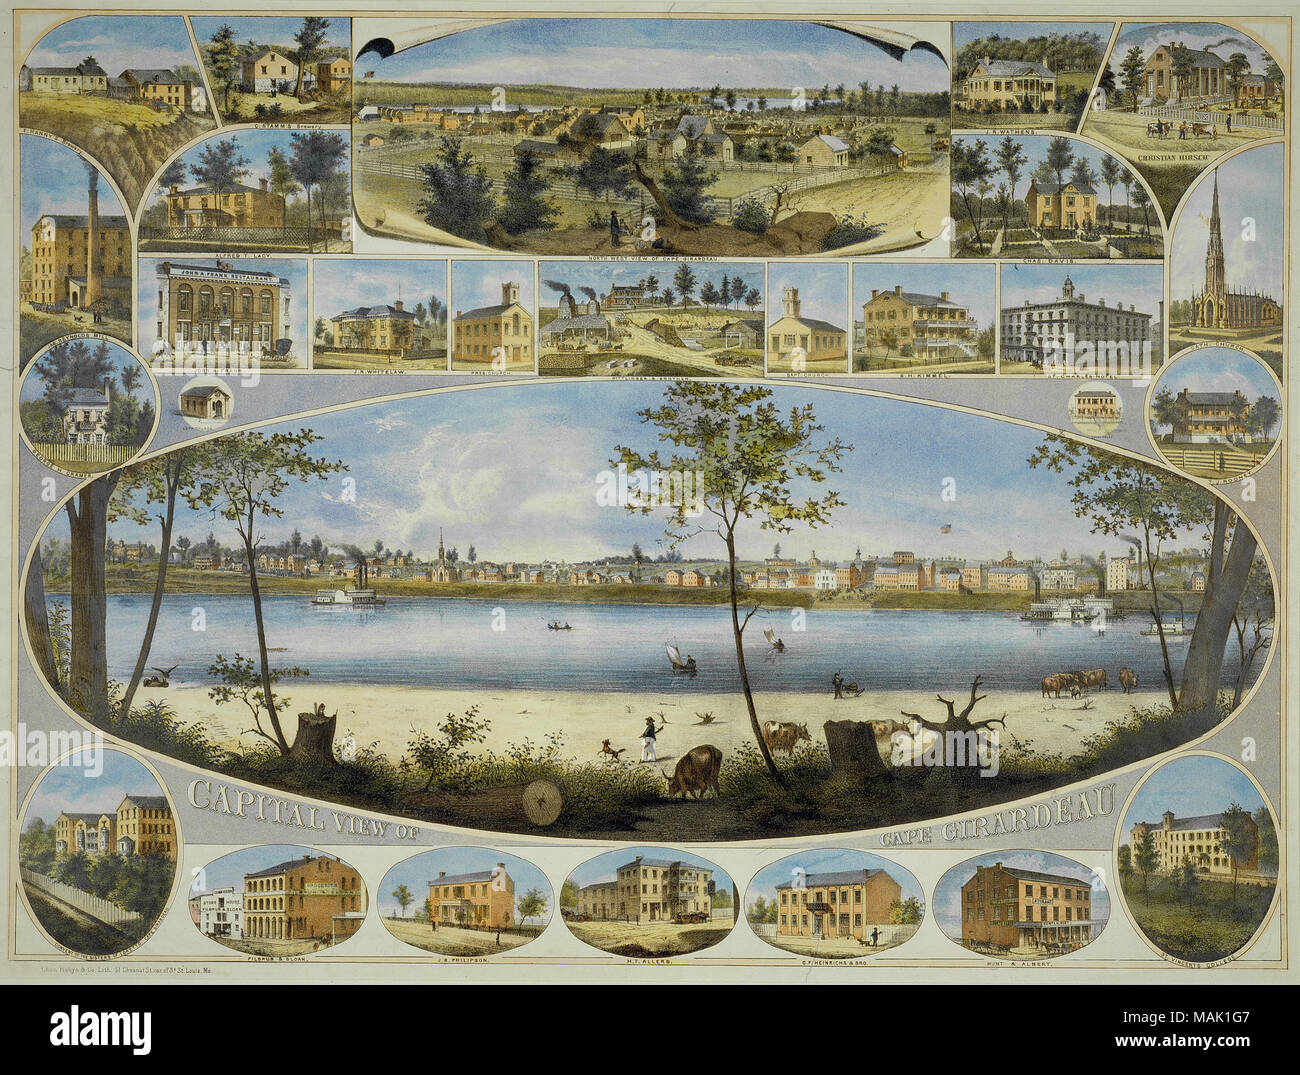 Color lithograph with main oval scene of Cape Girardeau from across the river, showing part of the Illinois shoreline, the river with small boats, and the buildings of Cape Girardeau beyond the river. Smaller oval view at top is 'Southwest View of Cape Girardeau,' and one smaller view and twenty-five individual views of buildings are shown in small vignettes at the top and bottom of the print. Title: Capital View of Cape Girardeau.  . circa 1858. Charles Robyn and Co., St. Louis Stock Photo